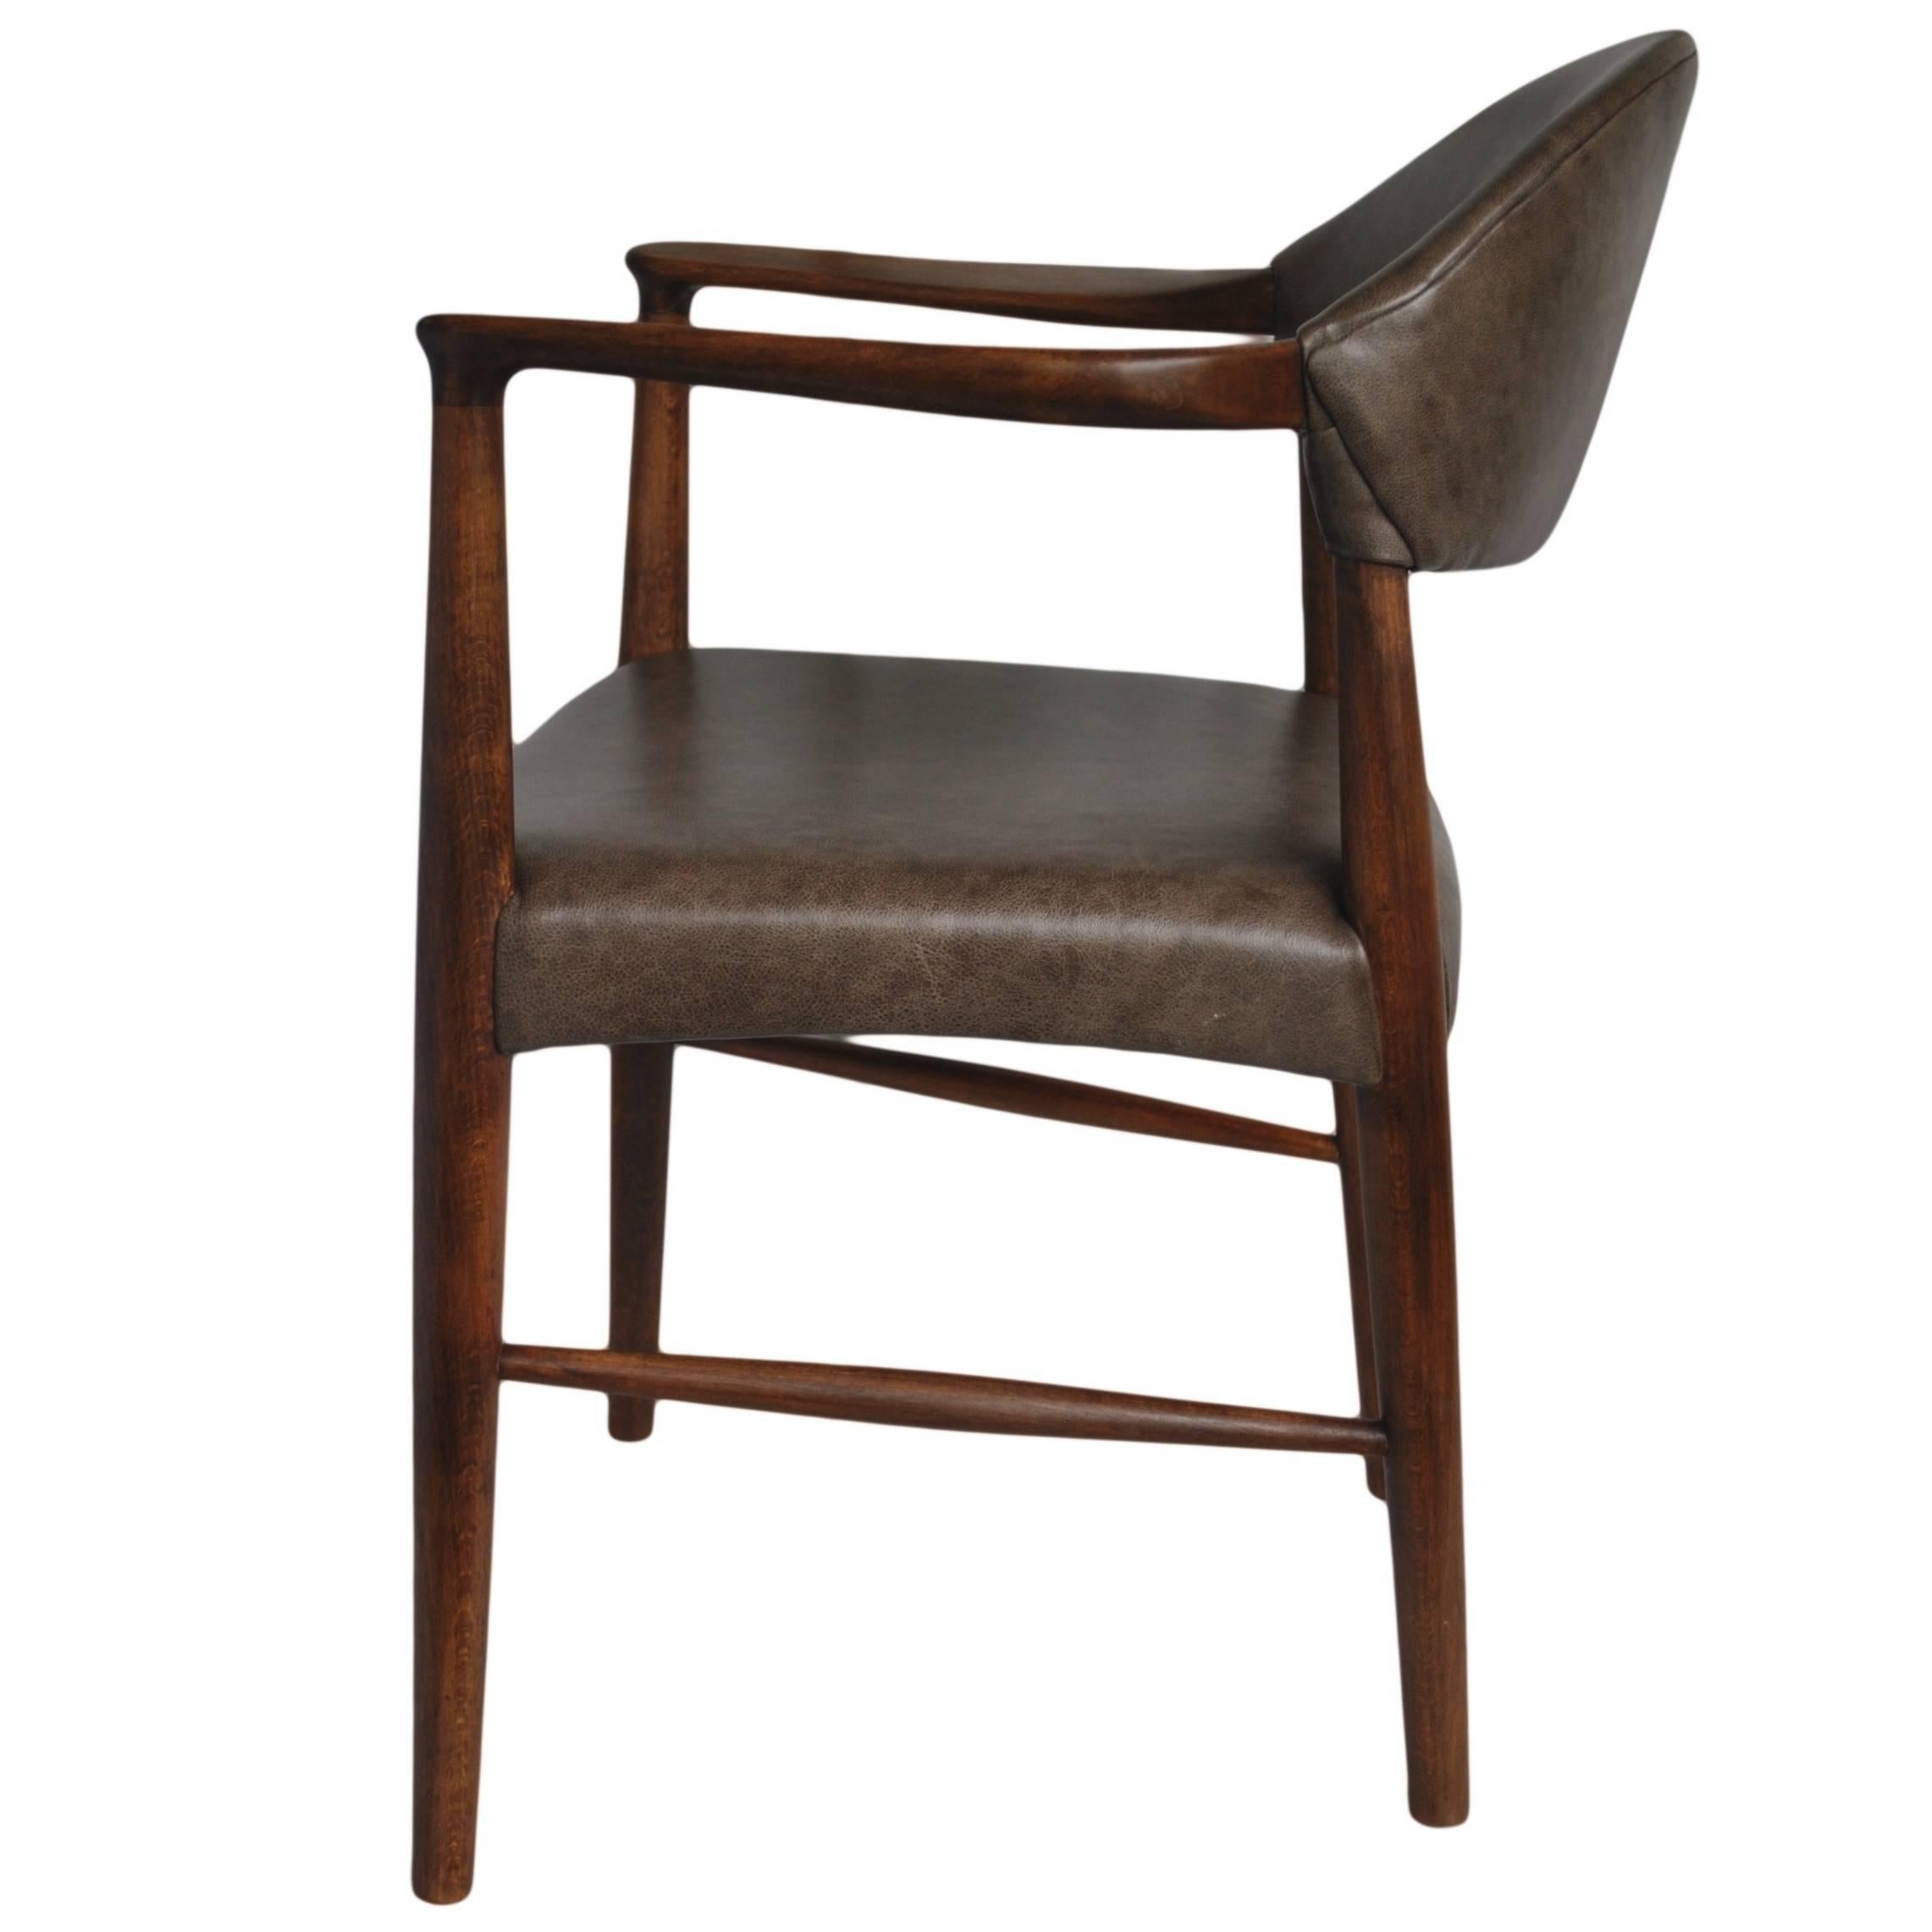 Kurt Olsen Chair, fully refurbished and with new Italian Leather